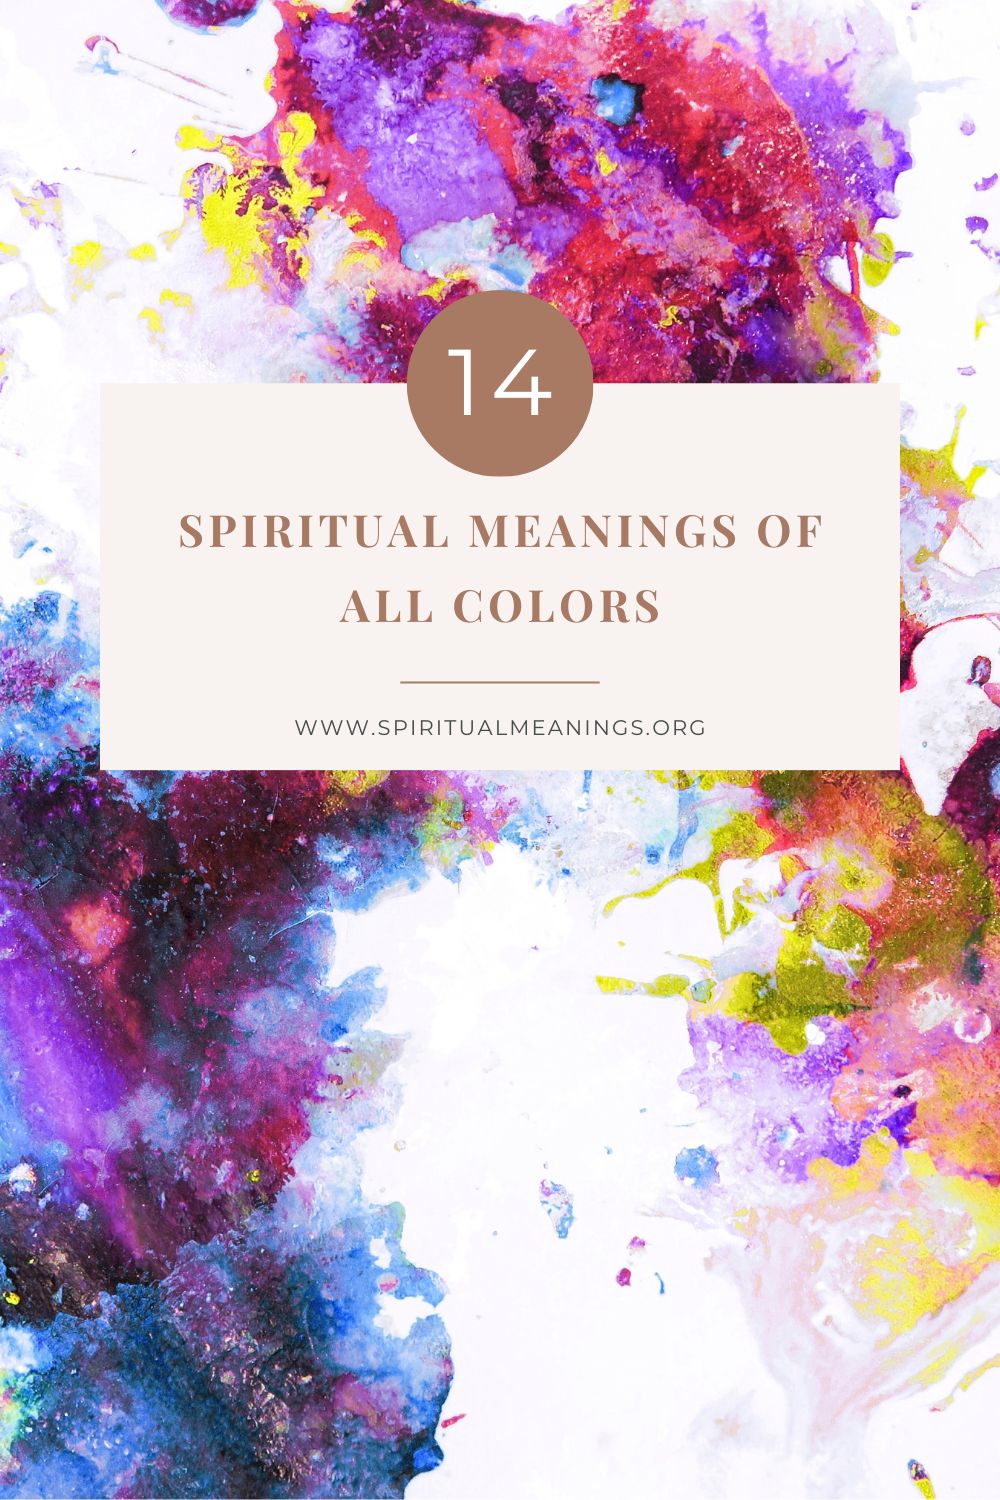 14 Spiritual Meanings of All Colors